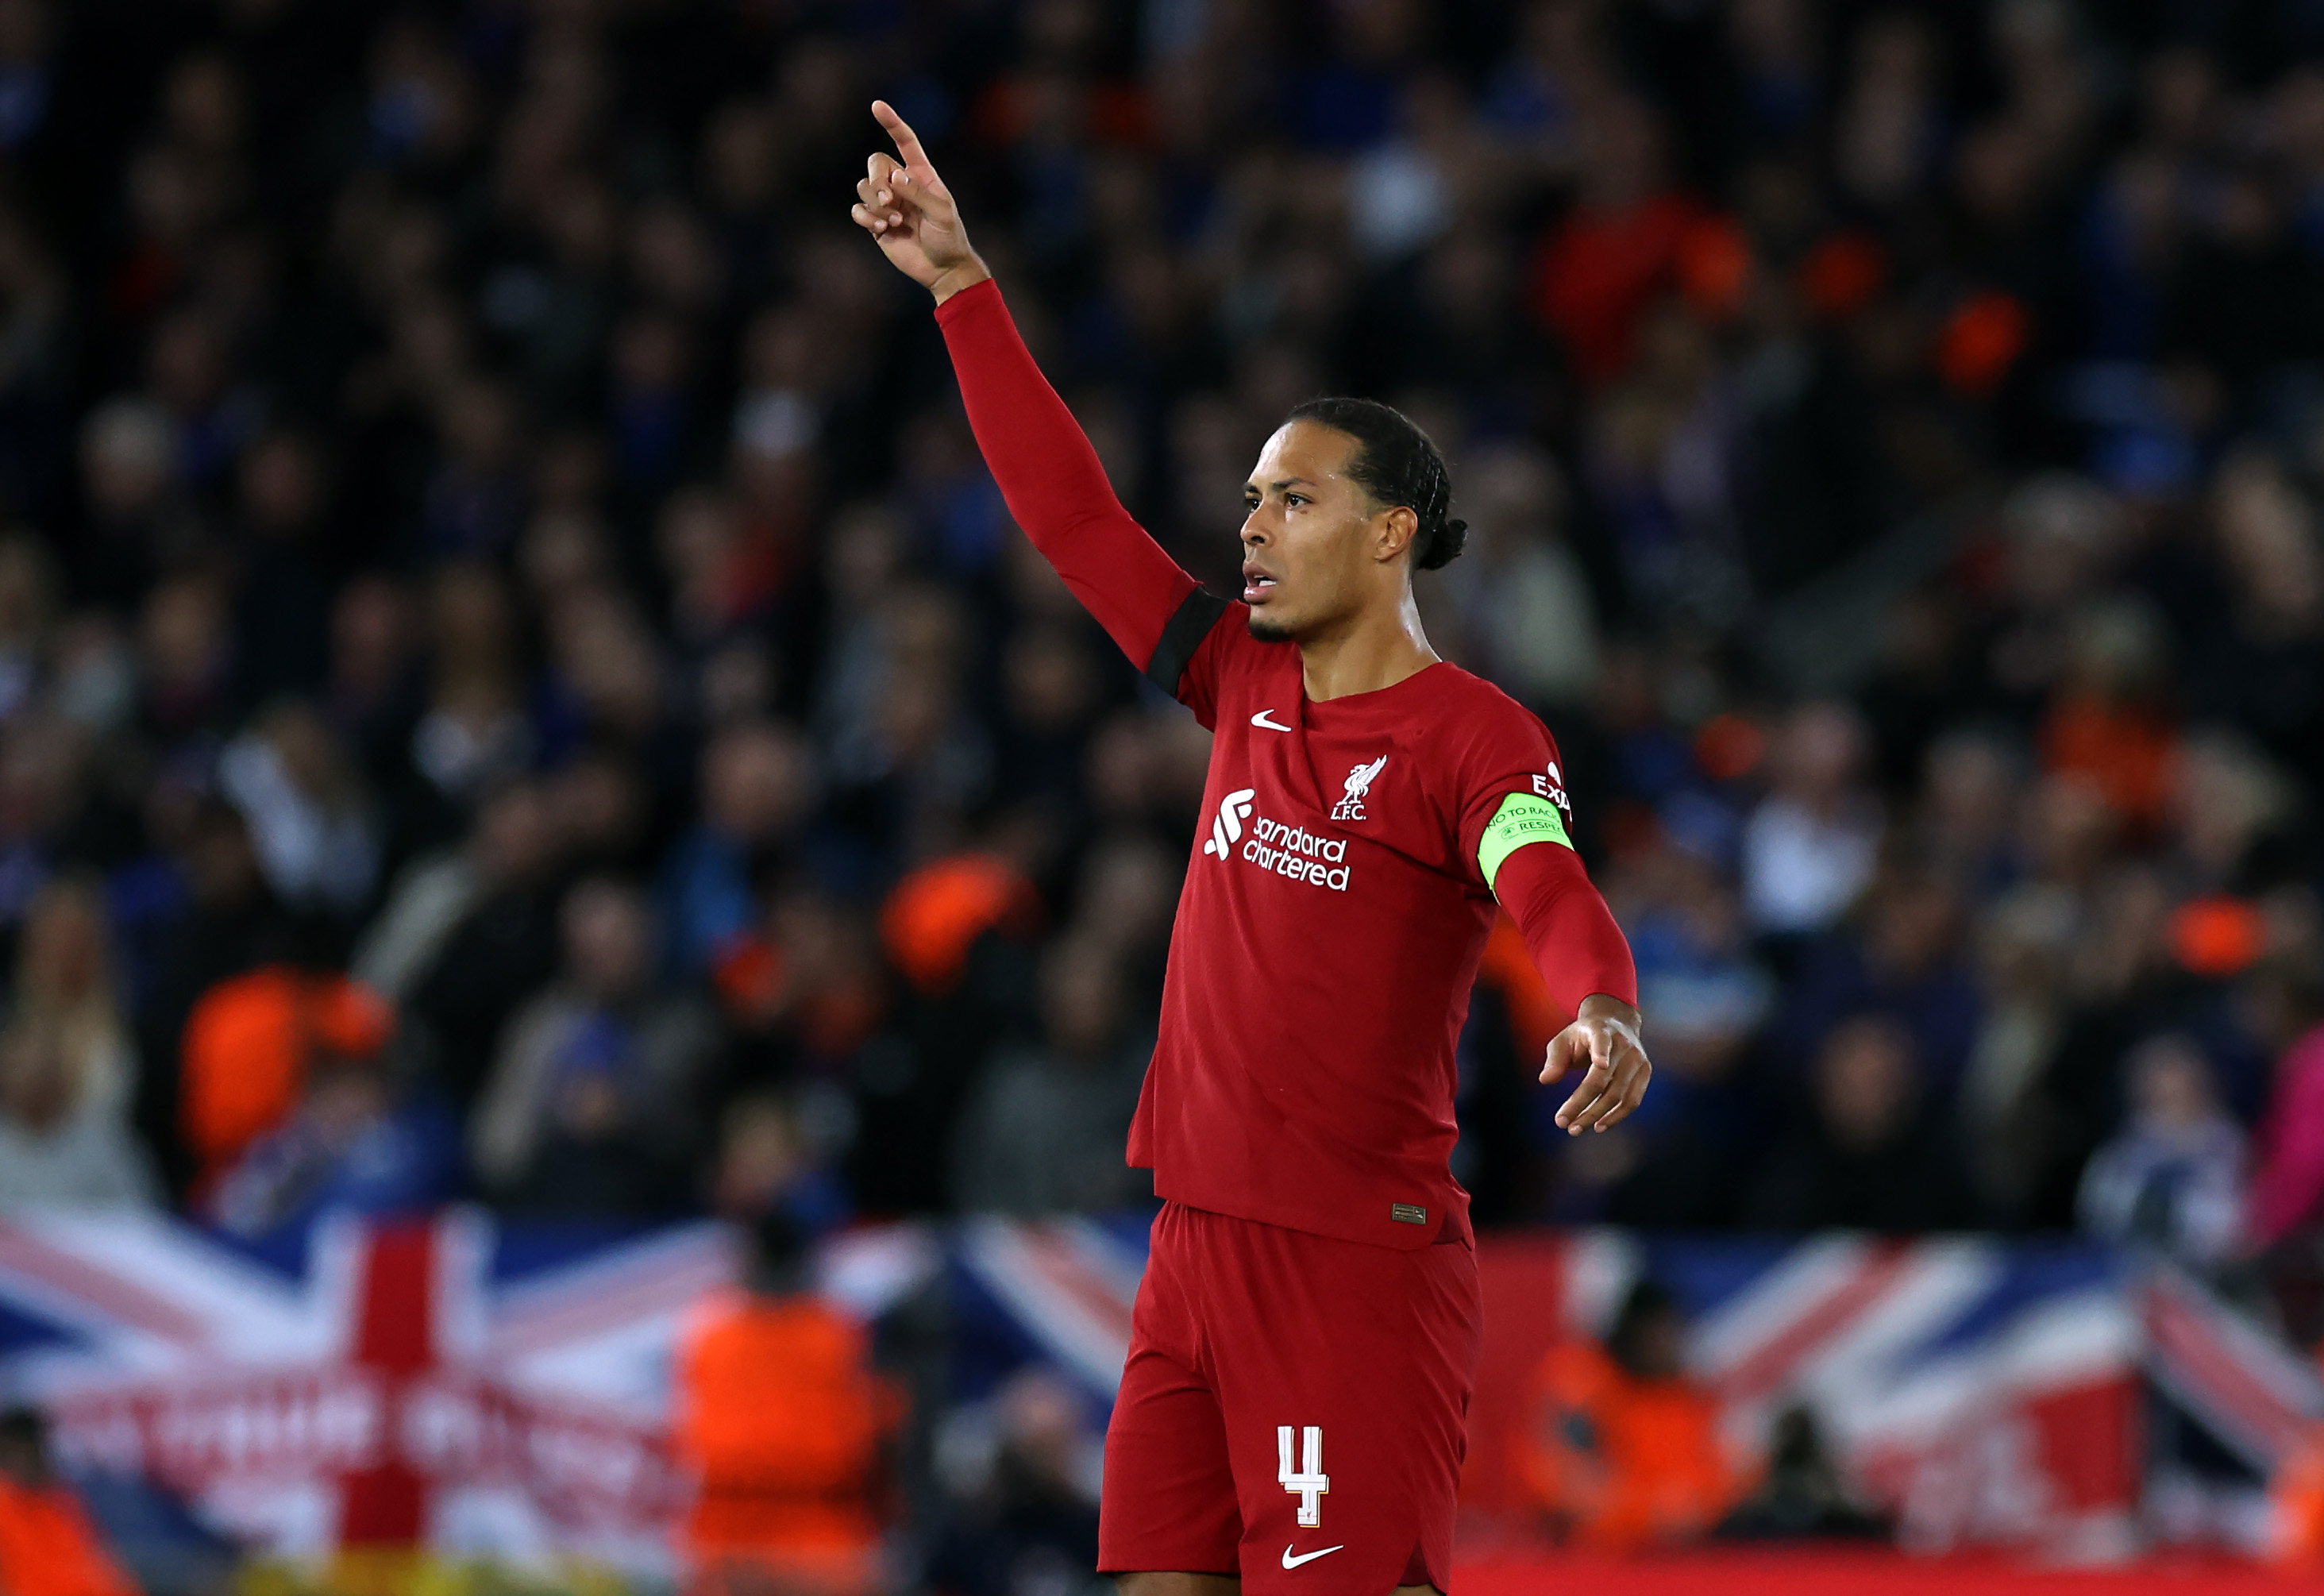 Virgil van Dijk of Liverpool gestures during the UEFA Champions League group A match between Liverpool FC and Rangers FC at Anfield on October 04, 2022 in Liverpool, England.